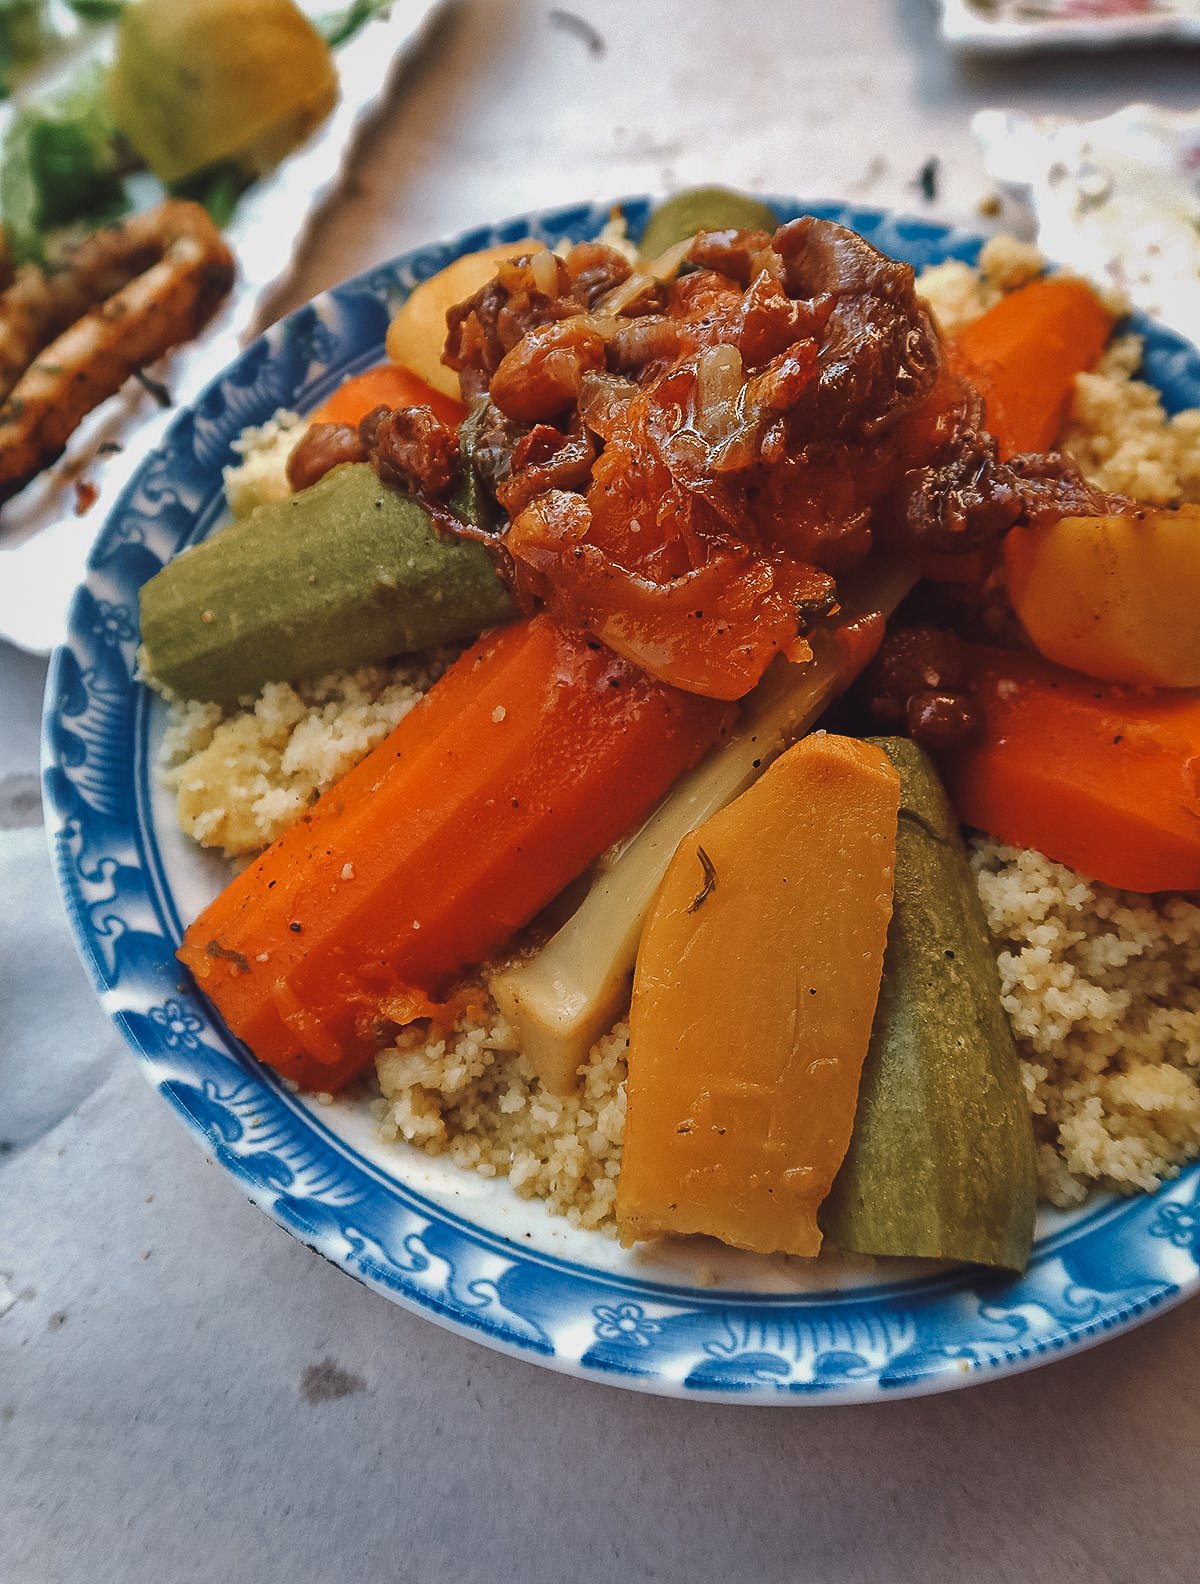 Vegetable couscous at a restaurant in Tangier